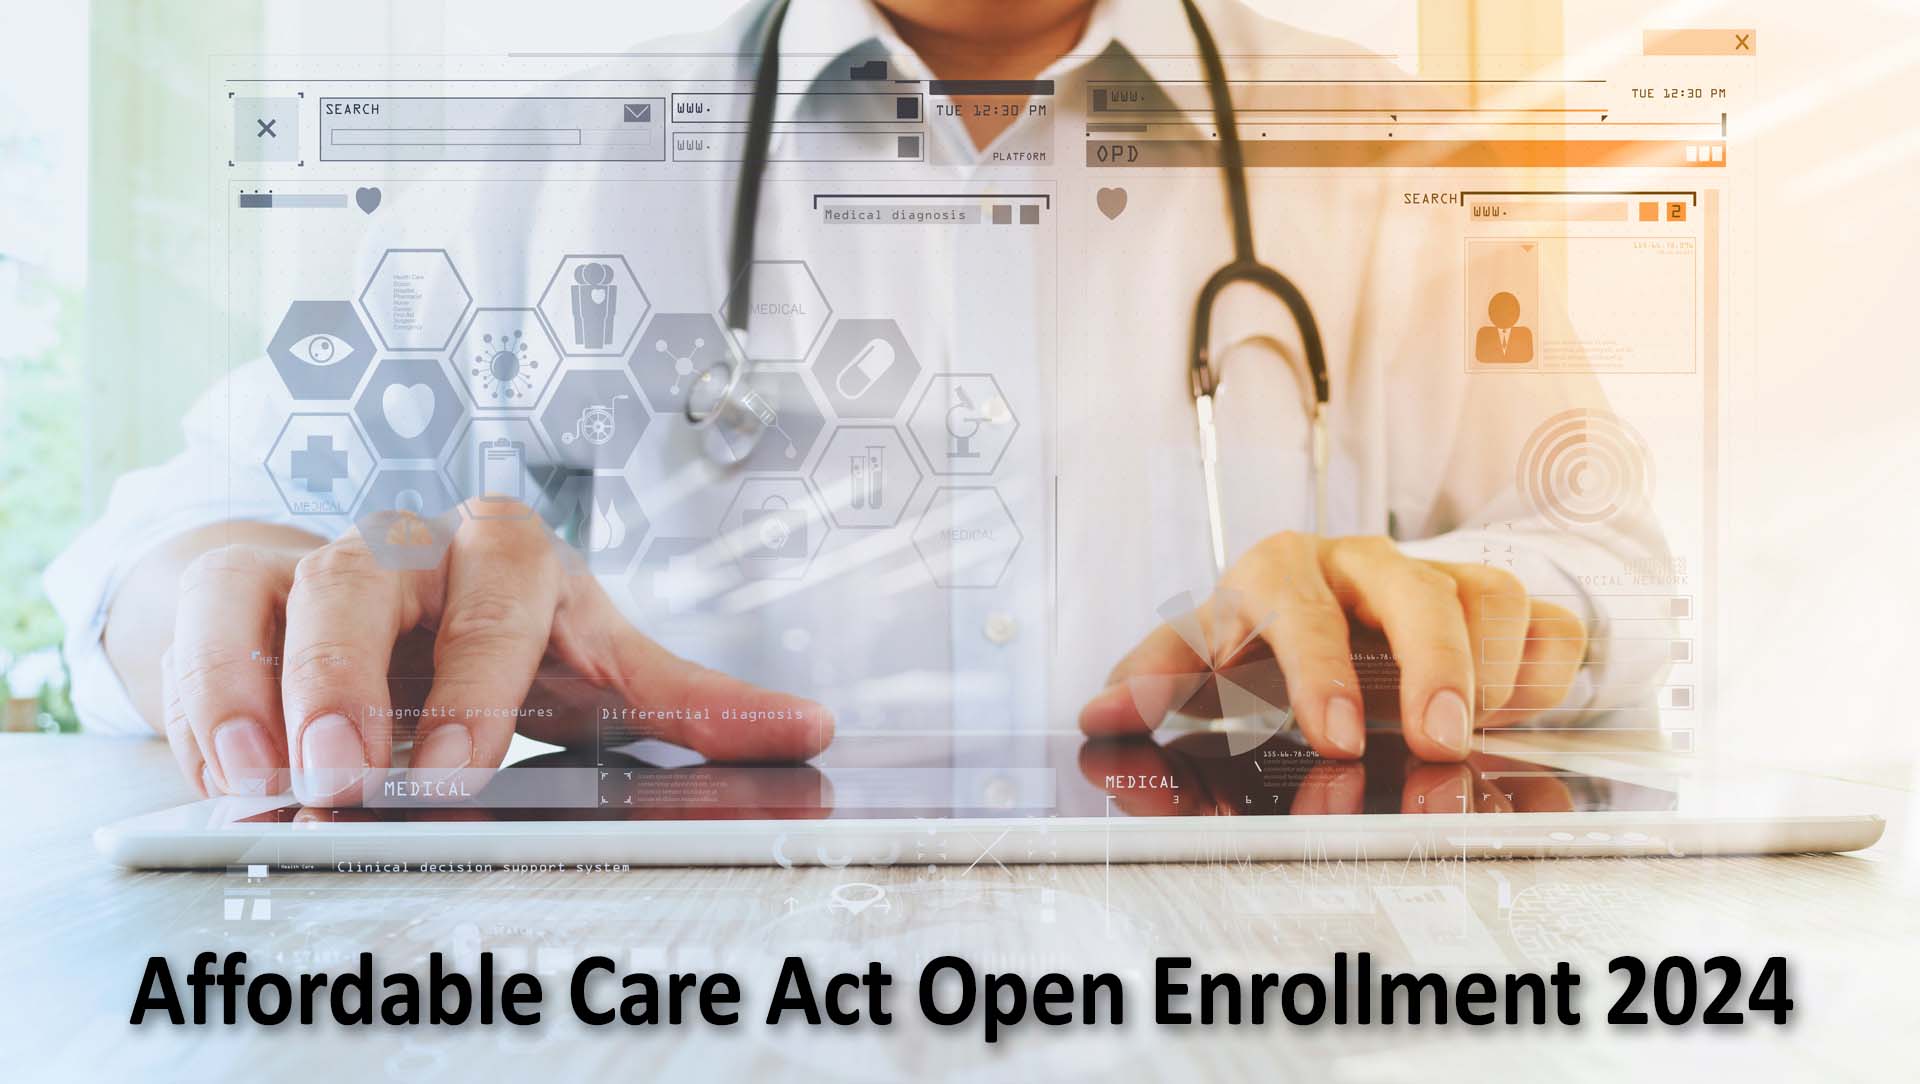 Open Enrollment for the Affordable Care Act Health Insurance